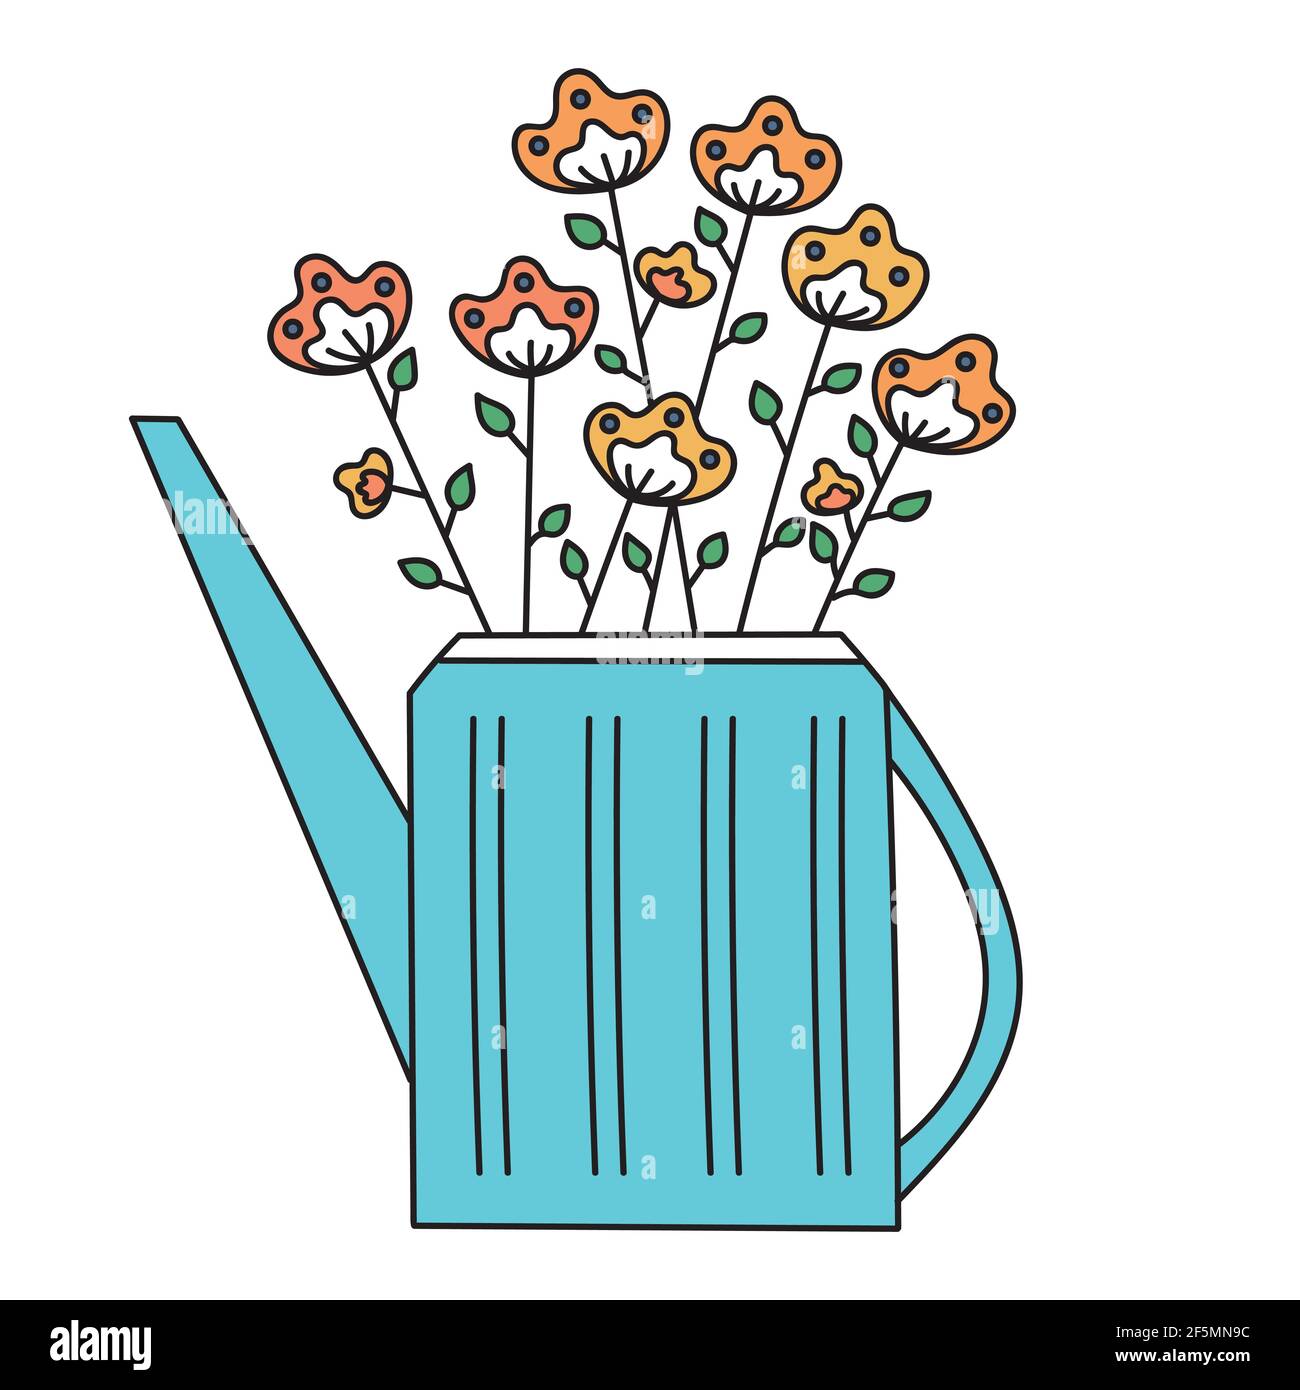 Watering can for plants, watering flowers, vase for interior design. vector icon. Doodle for textiles, t-shirts or postcards. Stock Vector